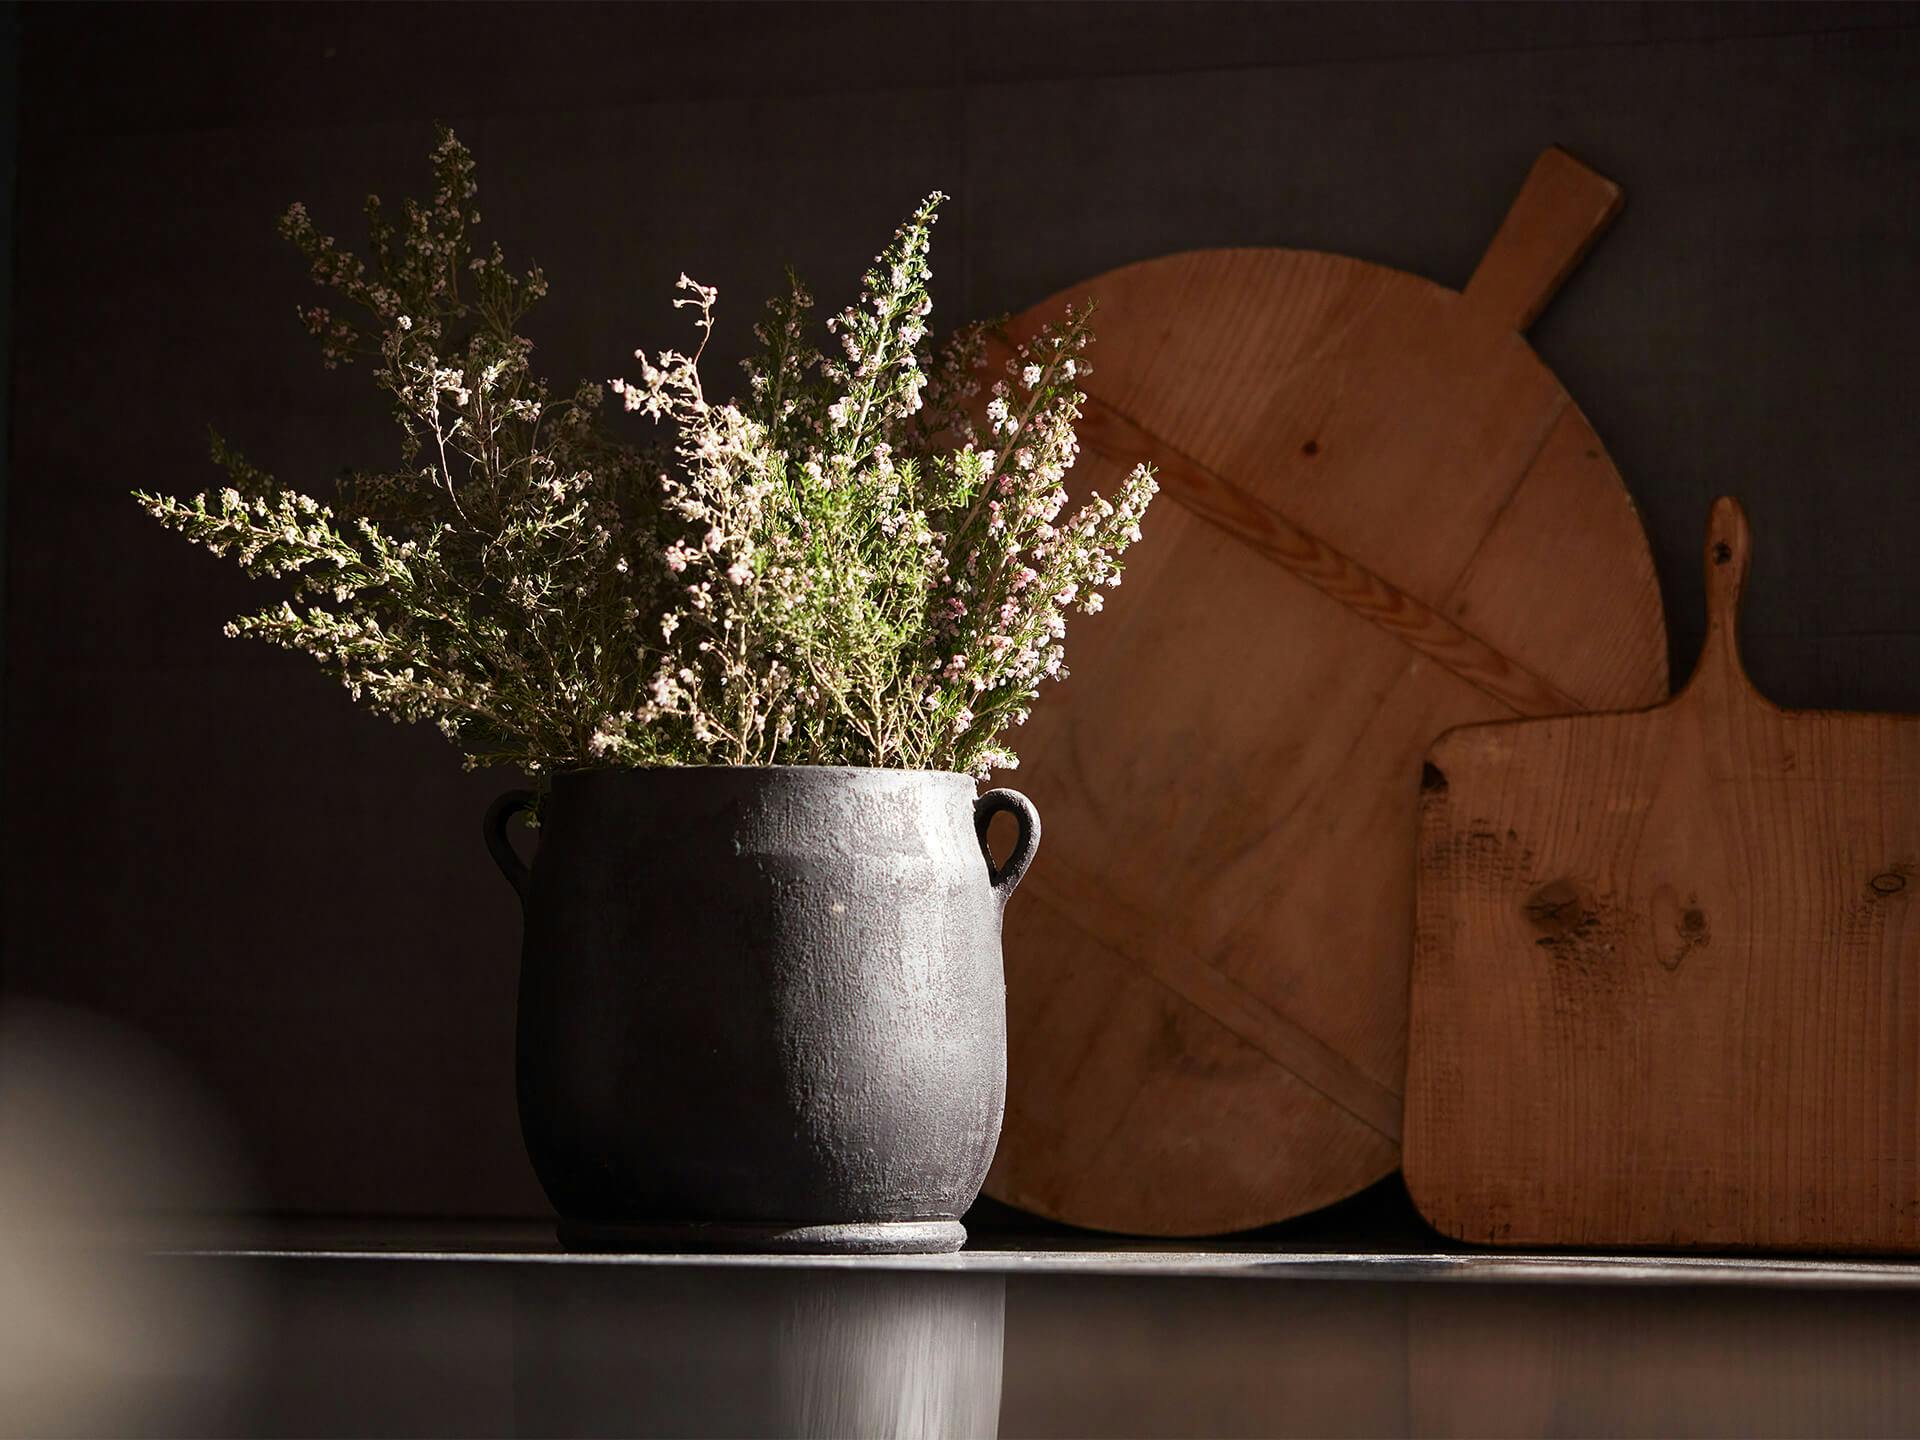 Lifestyle shot of a vase with wildflowers in it and wooden vintage kitchen supplies in the background